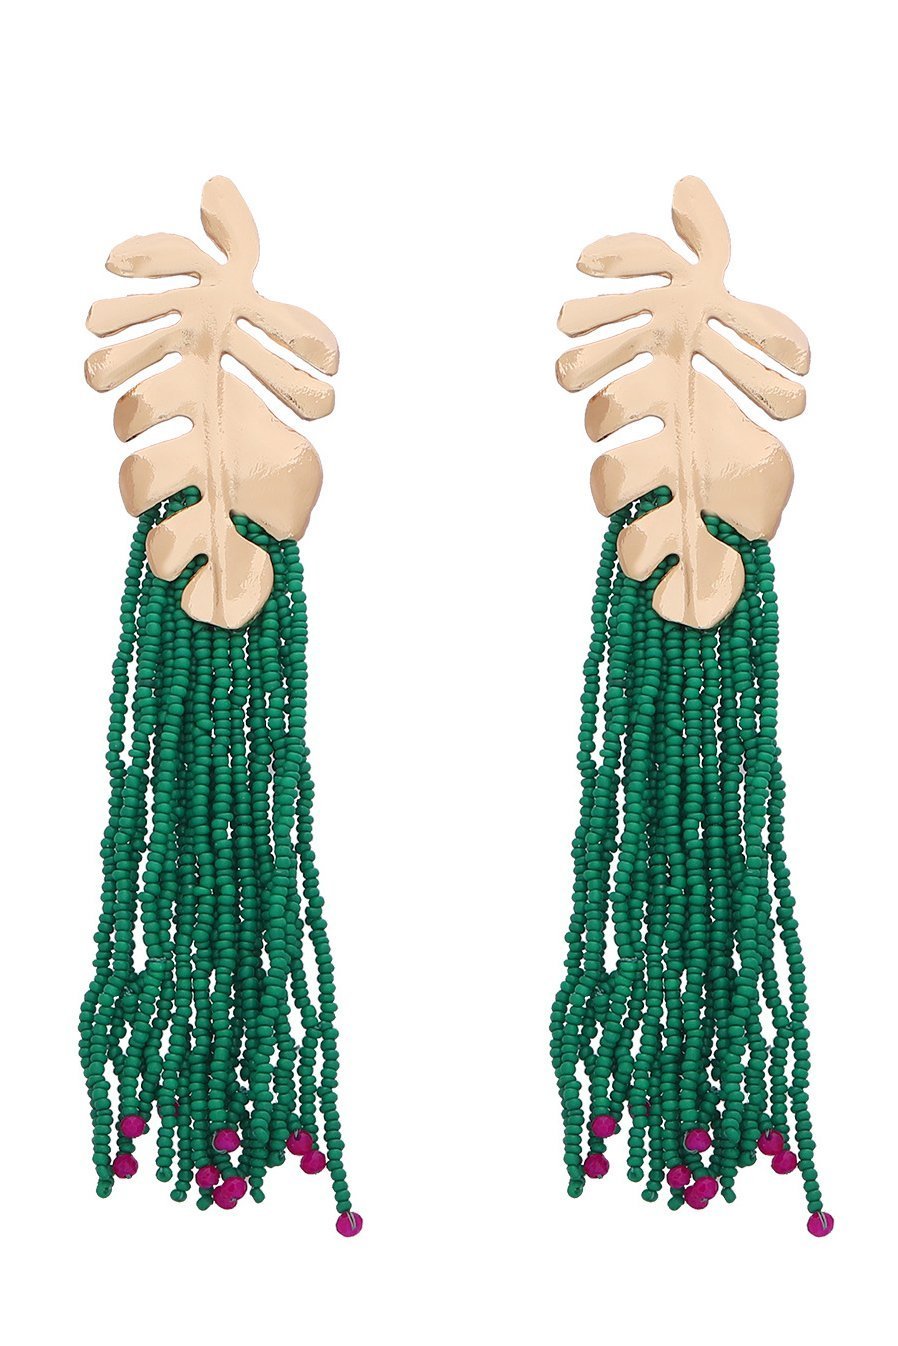 accessories-Palm Frond Beads Tassel Earring-SA00602262315-Green - Sunfere